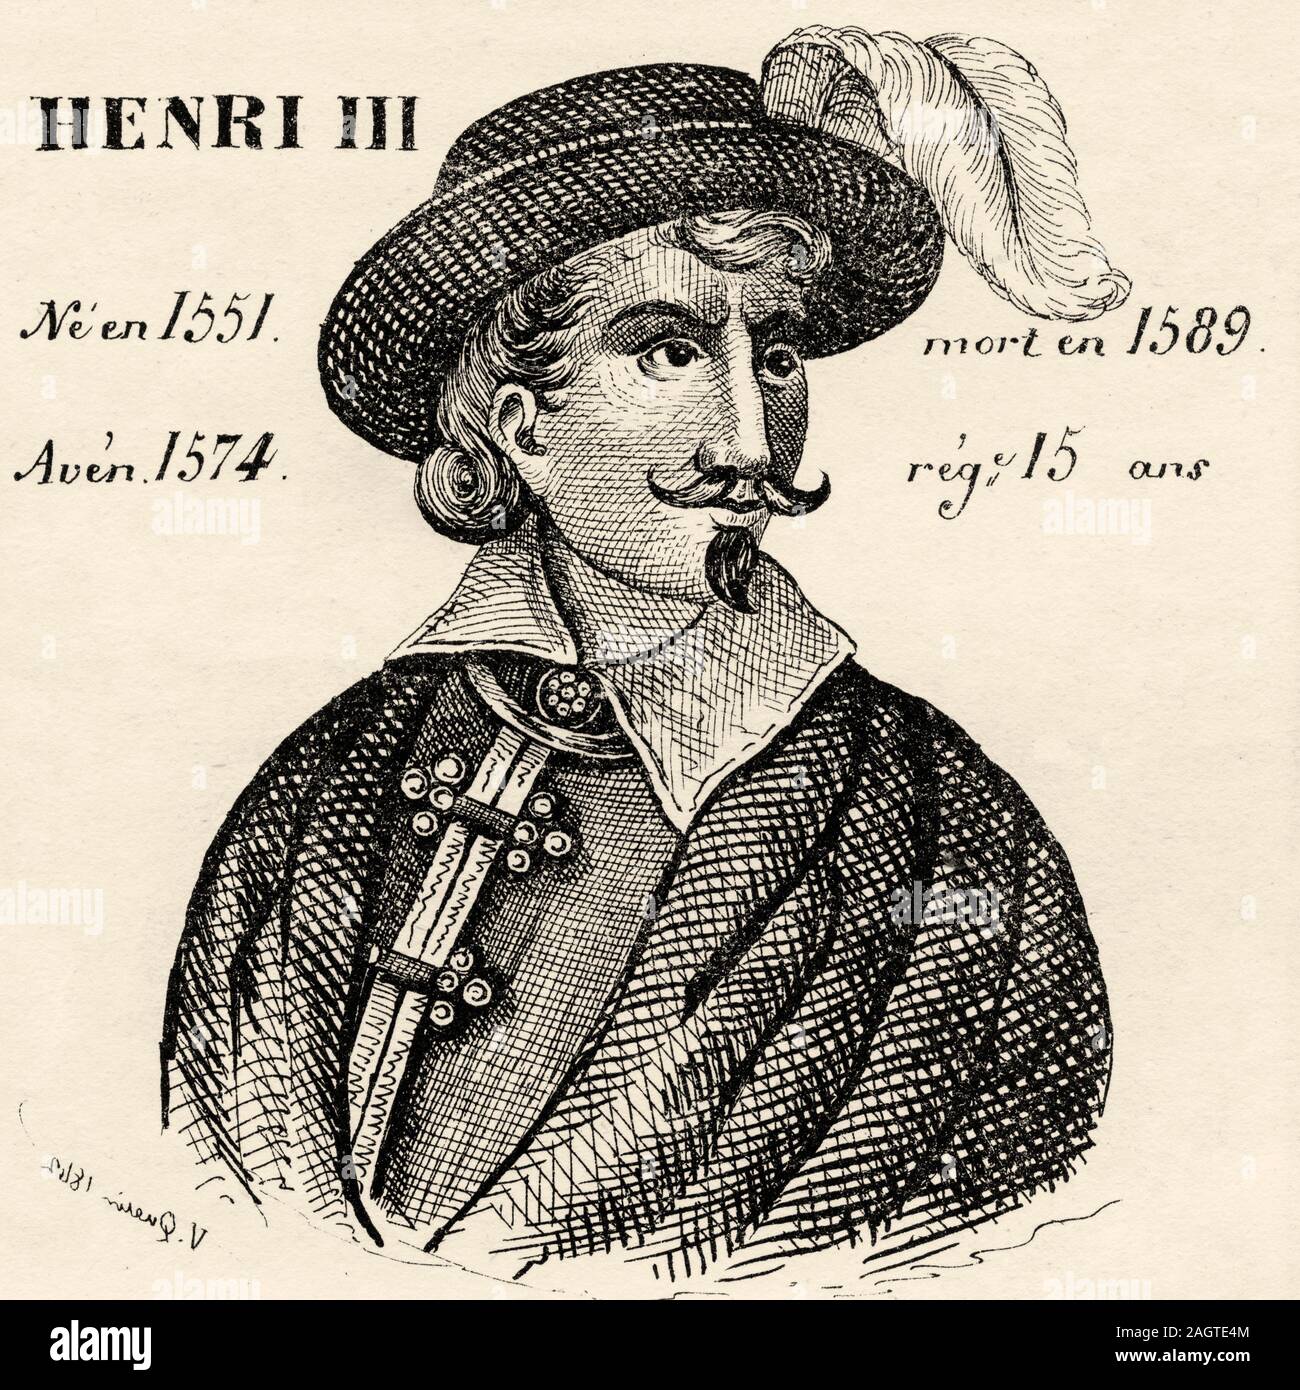 Portrait of Henri III (1551 - 1589). King of France from 1574 to 1589. Valois–Angoulême Branch. History of France, from the book Atlas de la France 18 Stock Photo